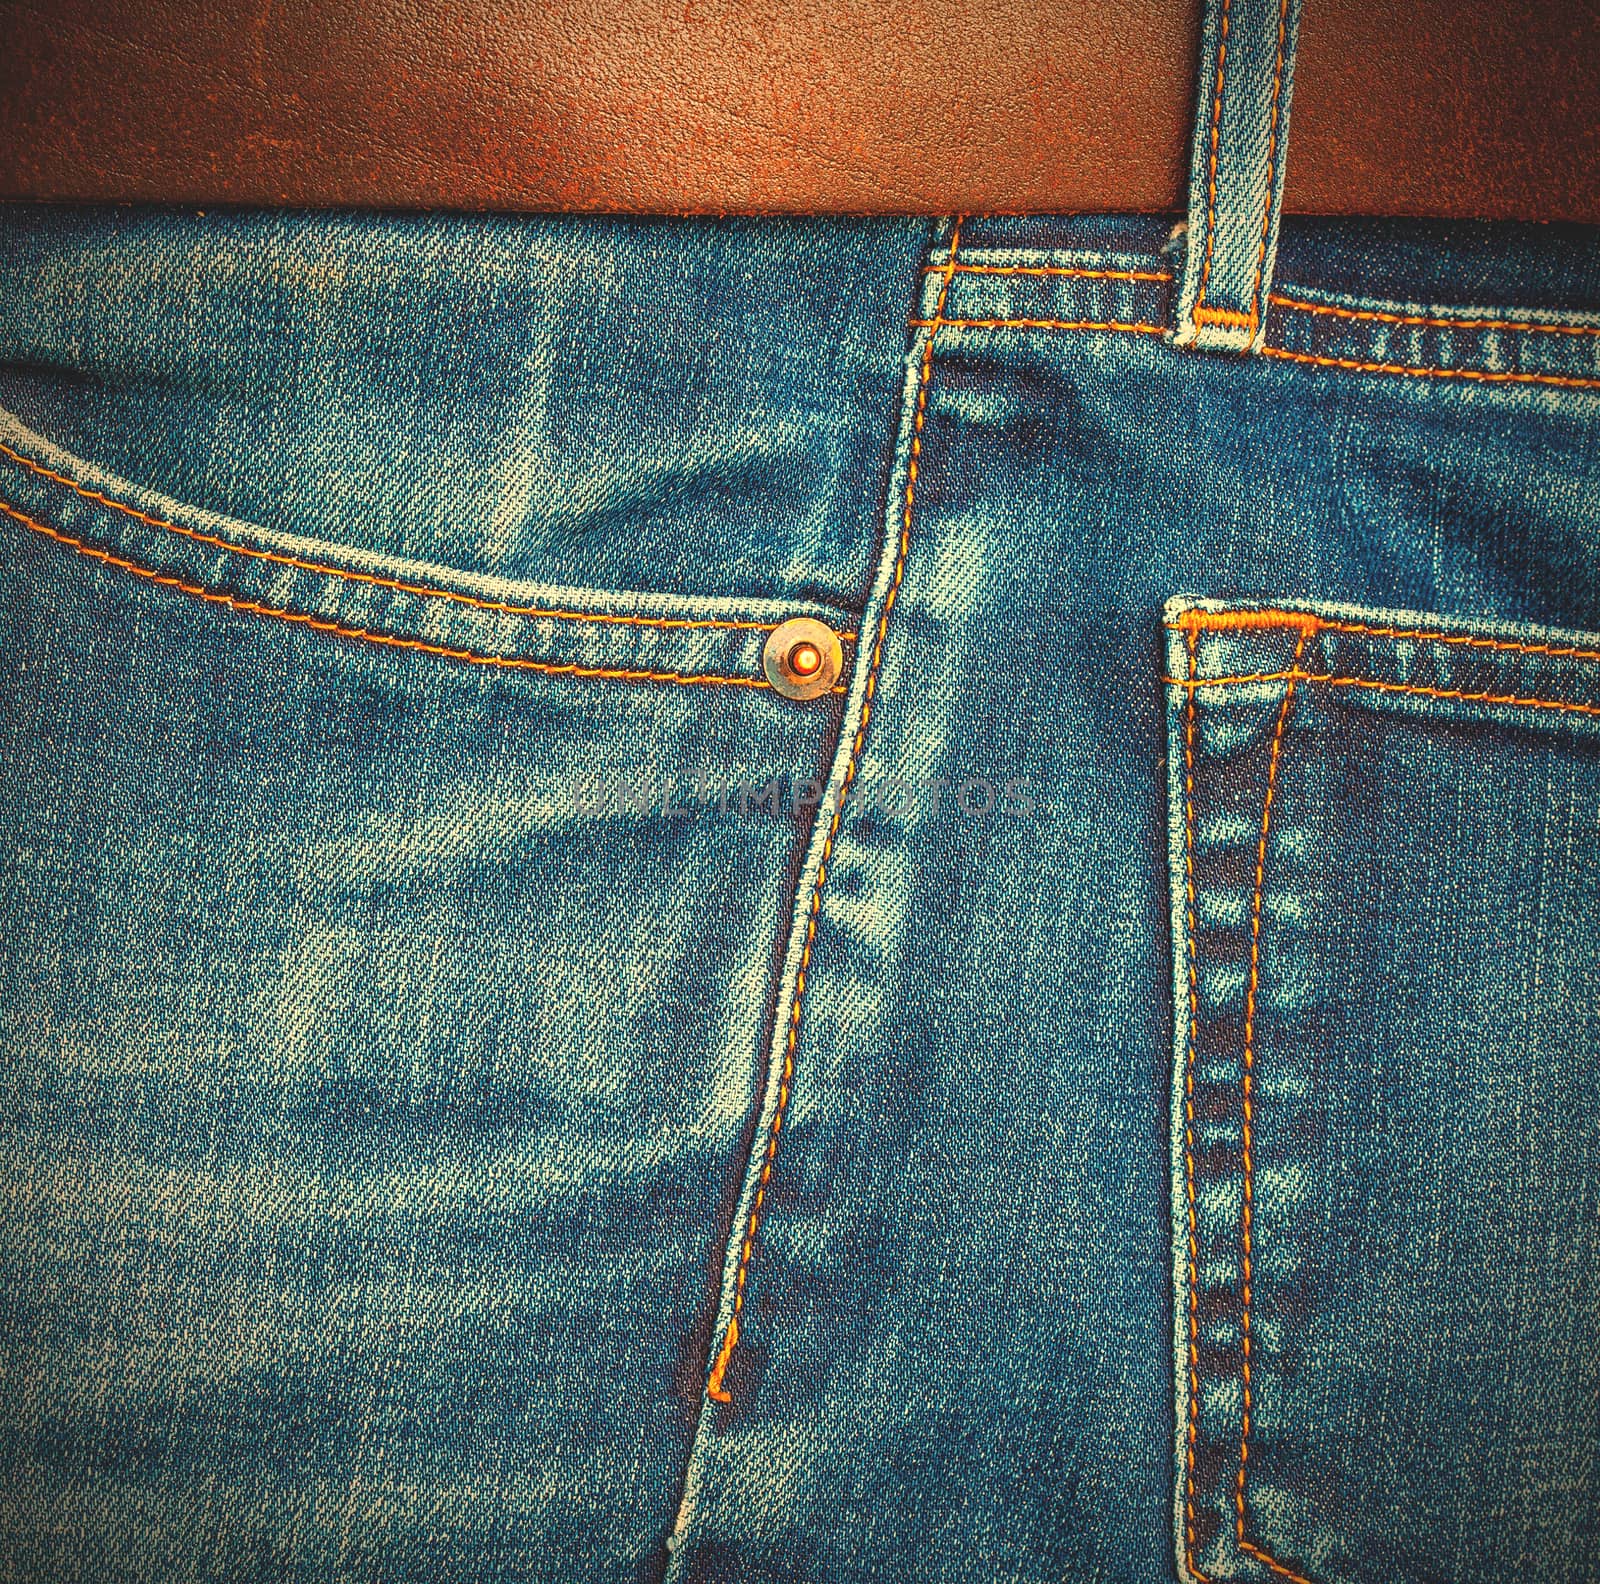 jeans with a brown leather belt by Astroid